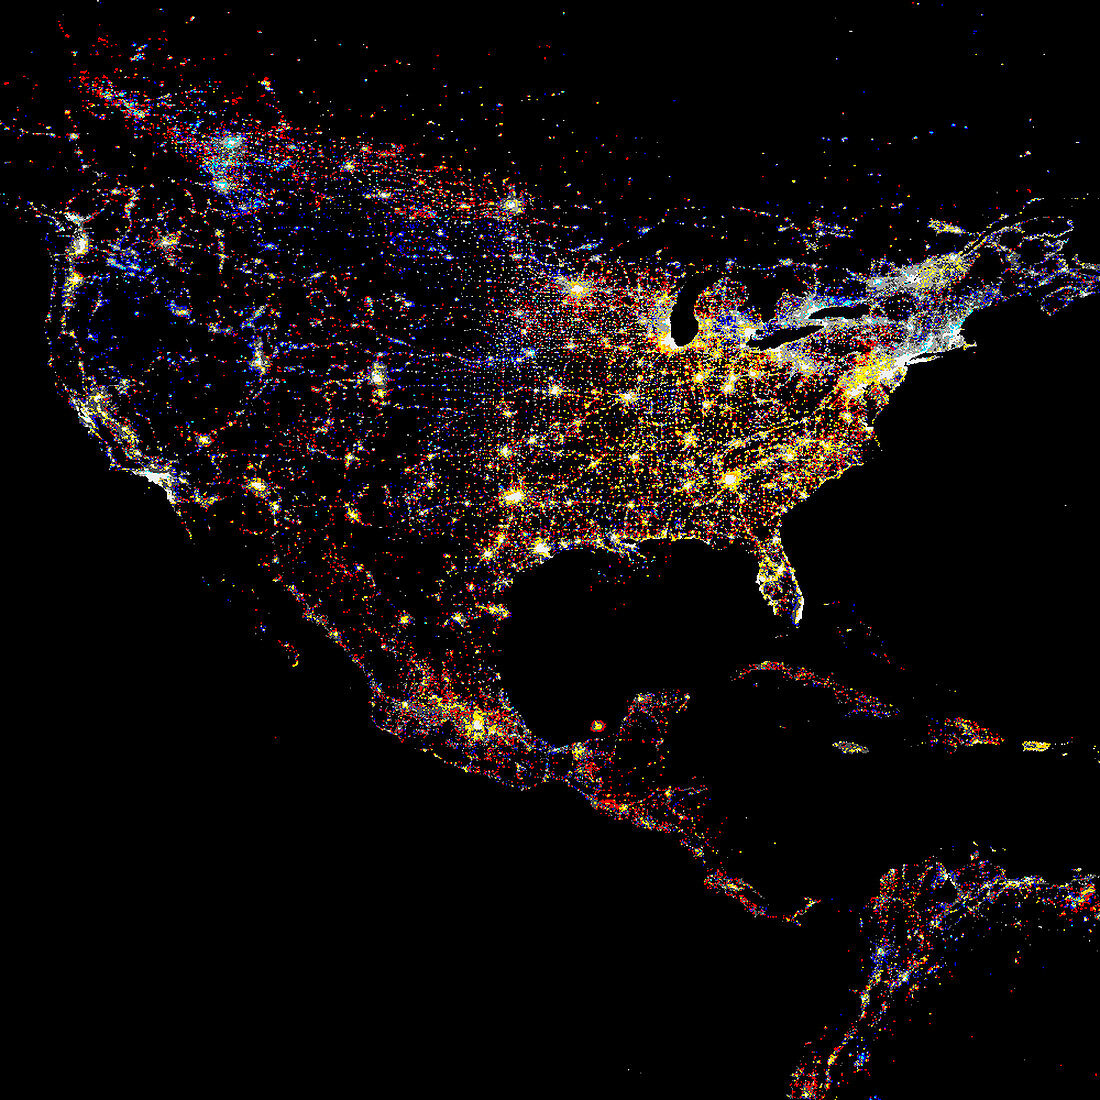 North America at night,1993-2003 changes